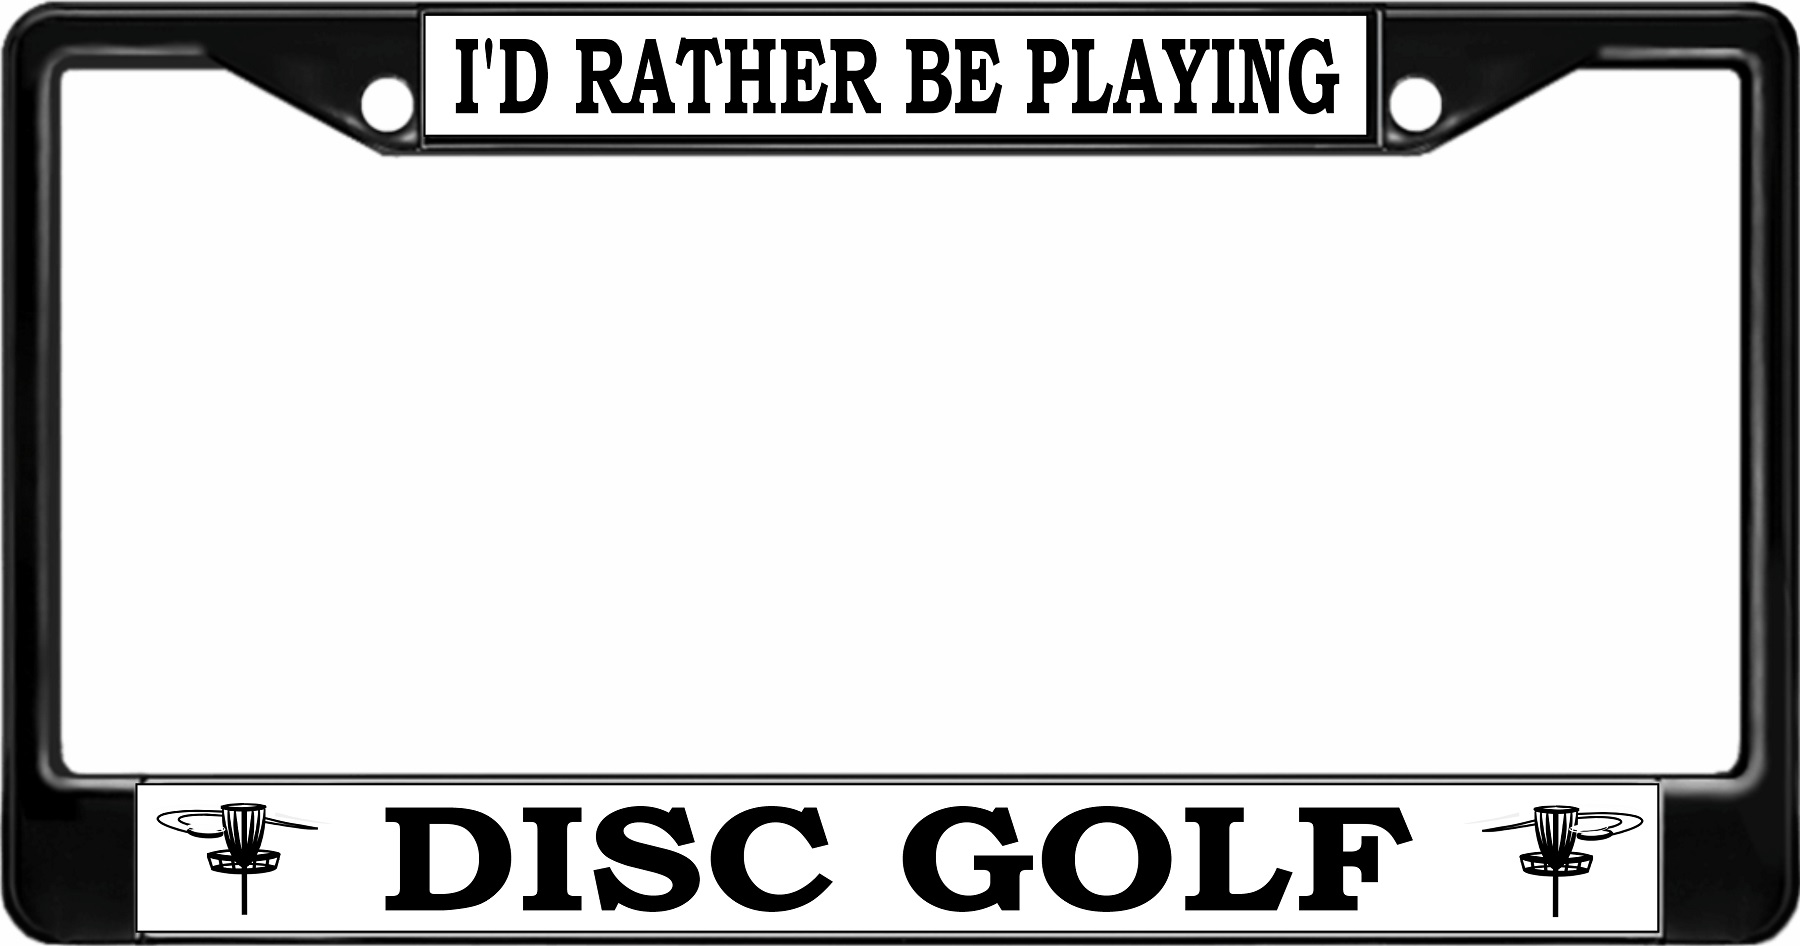 I'd Rather Be Playing Disc Golf Black License Plate FRAME